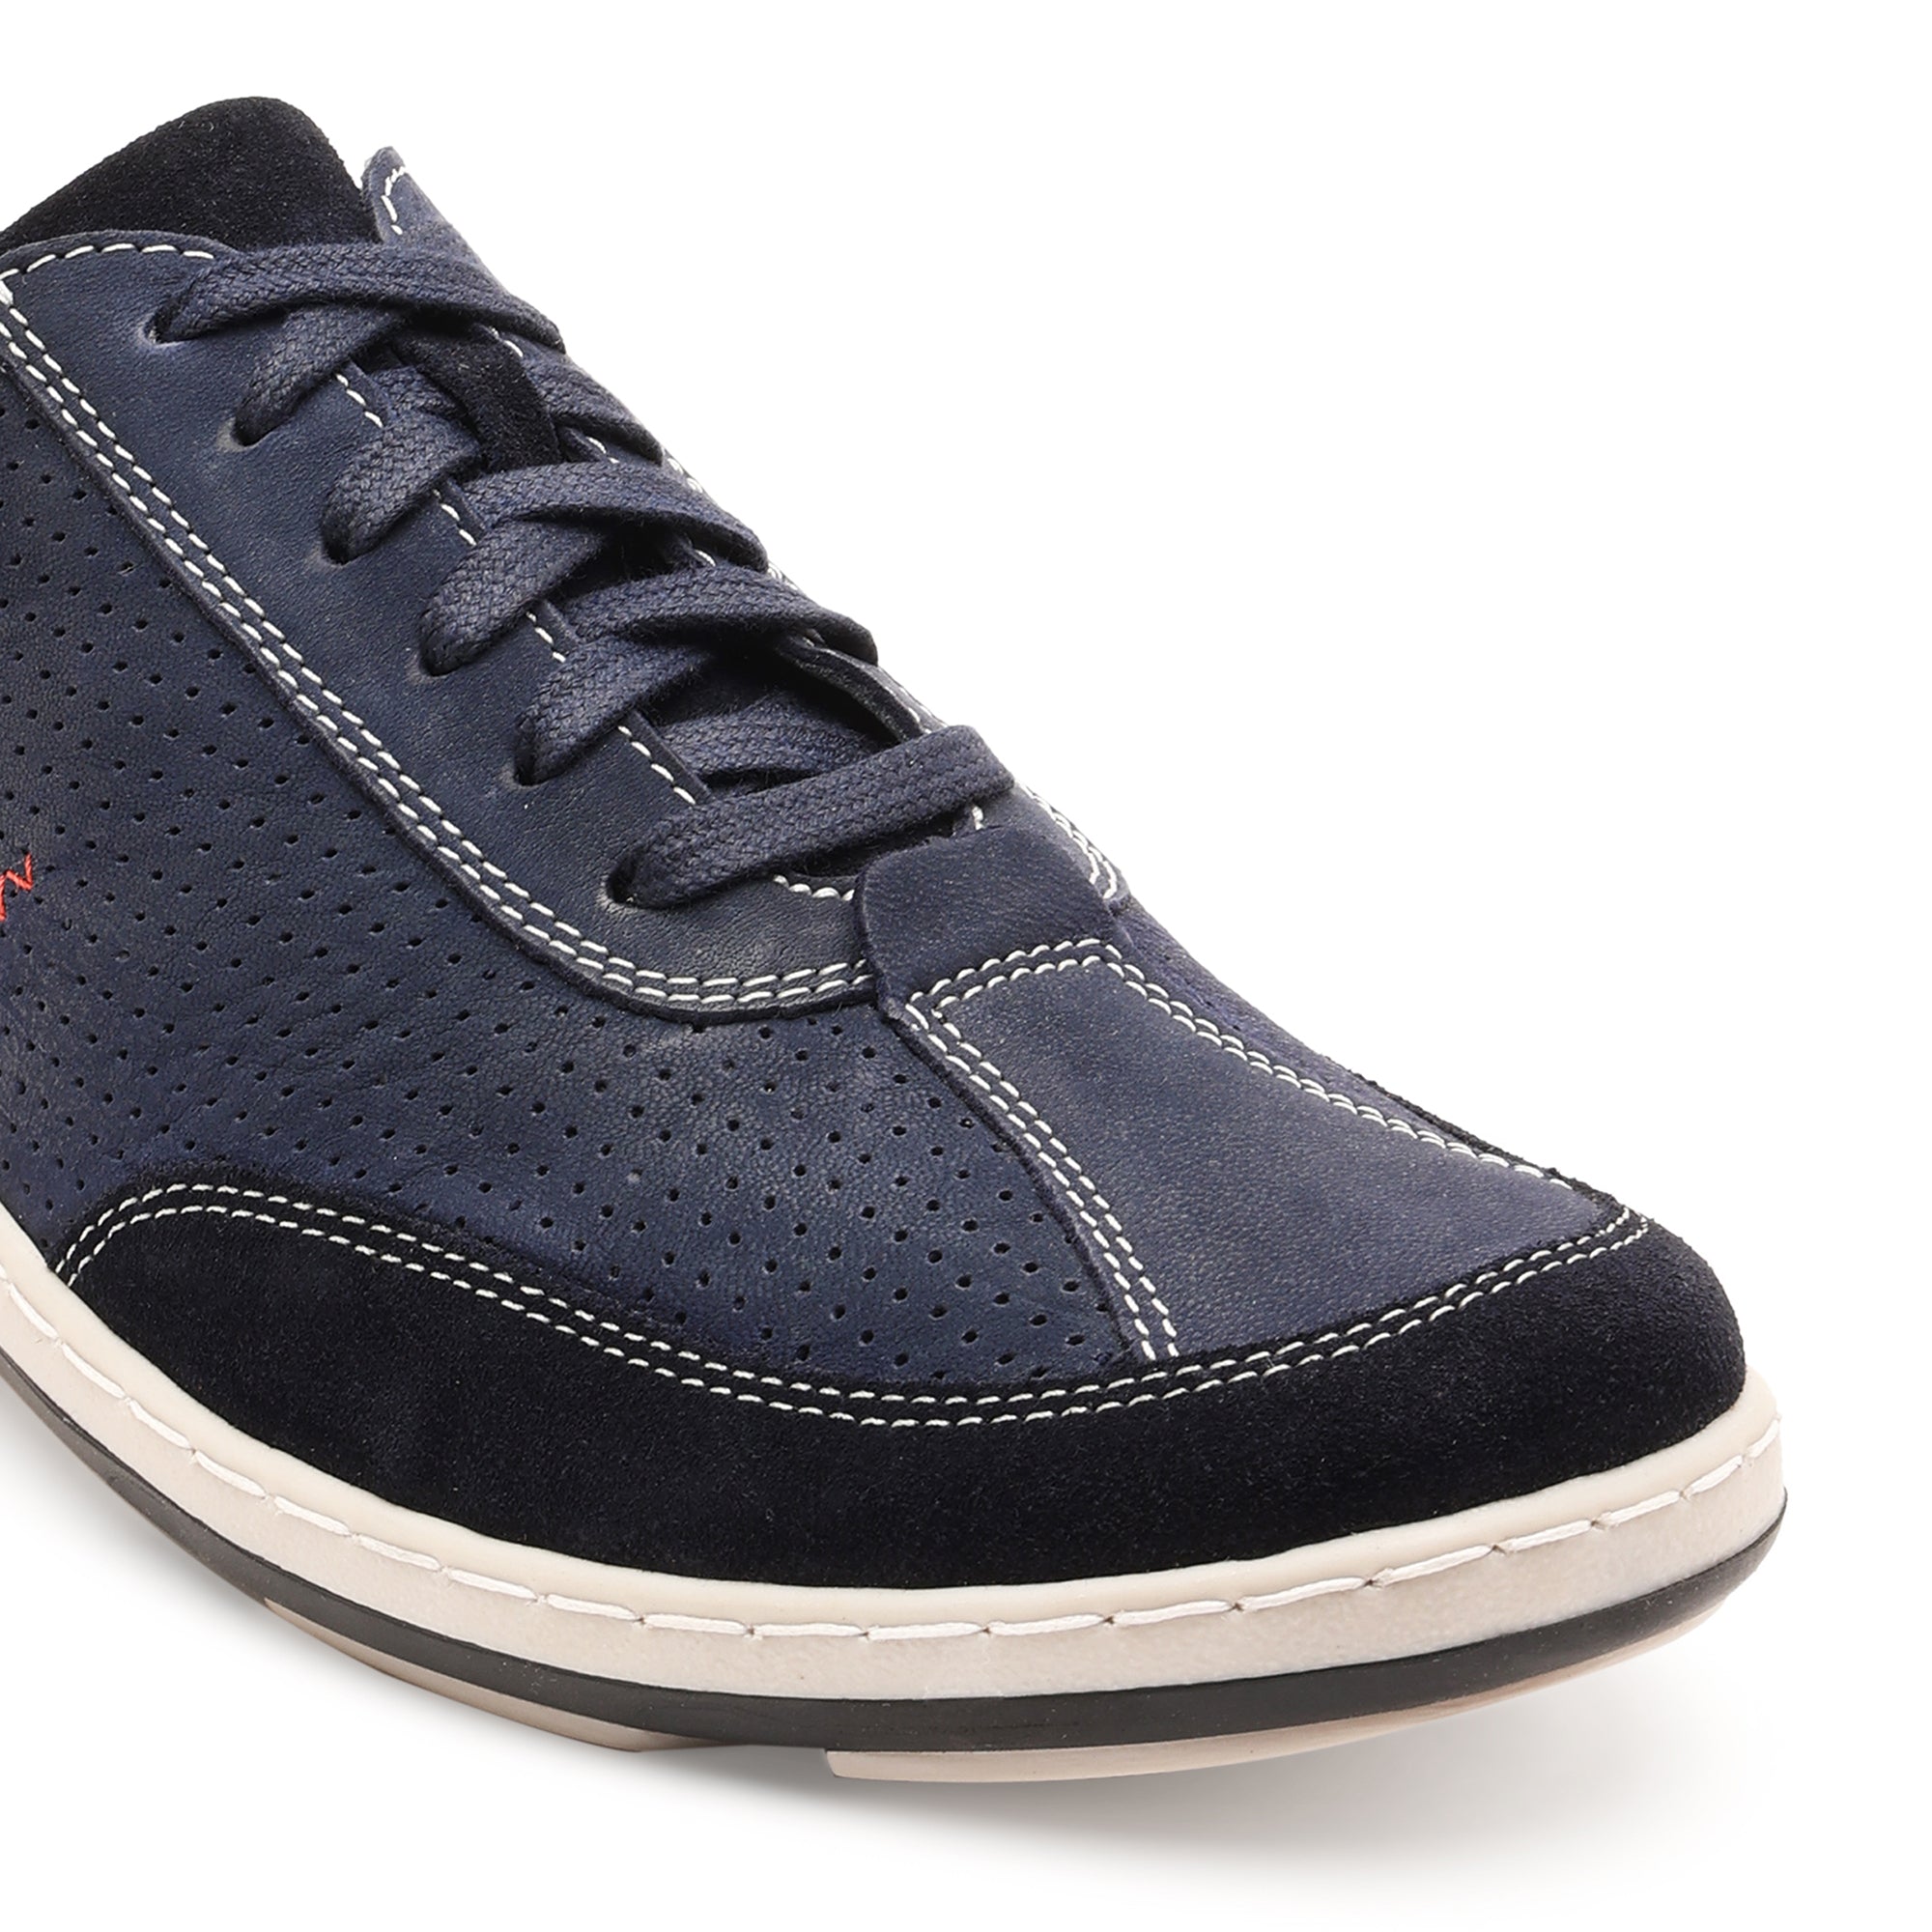 Quentin 08 Men Navy Dress Casual Shoes